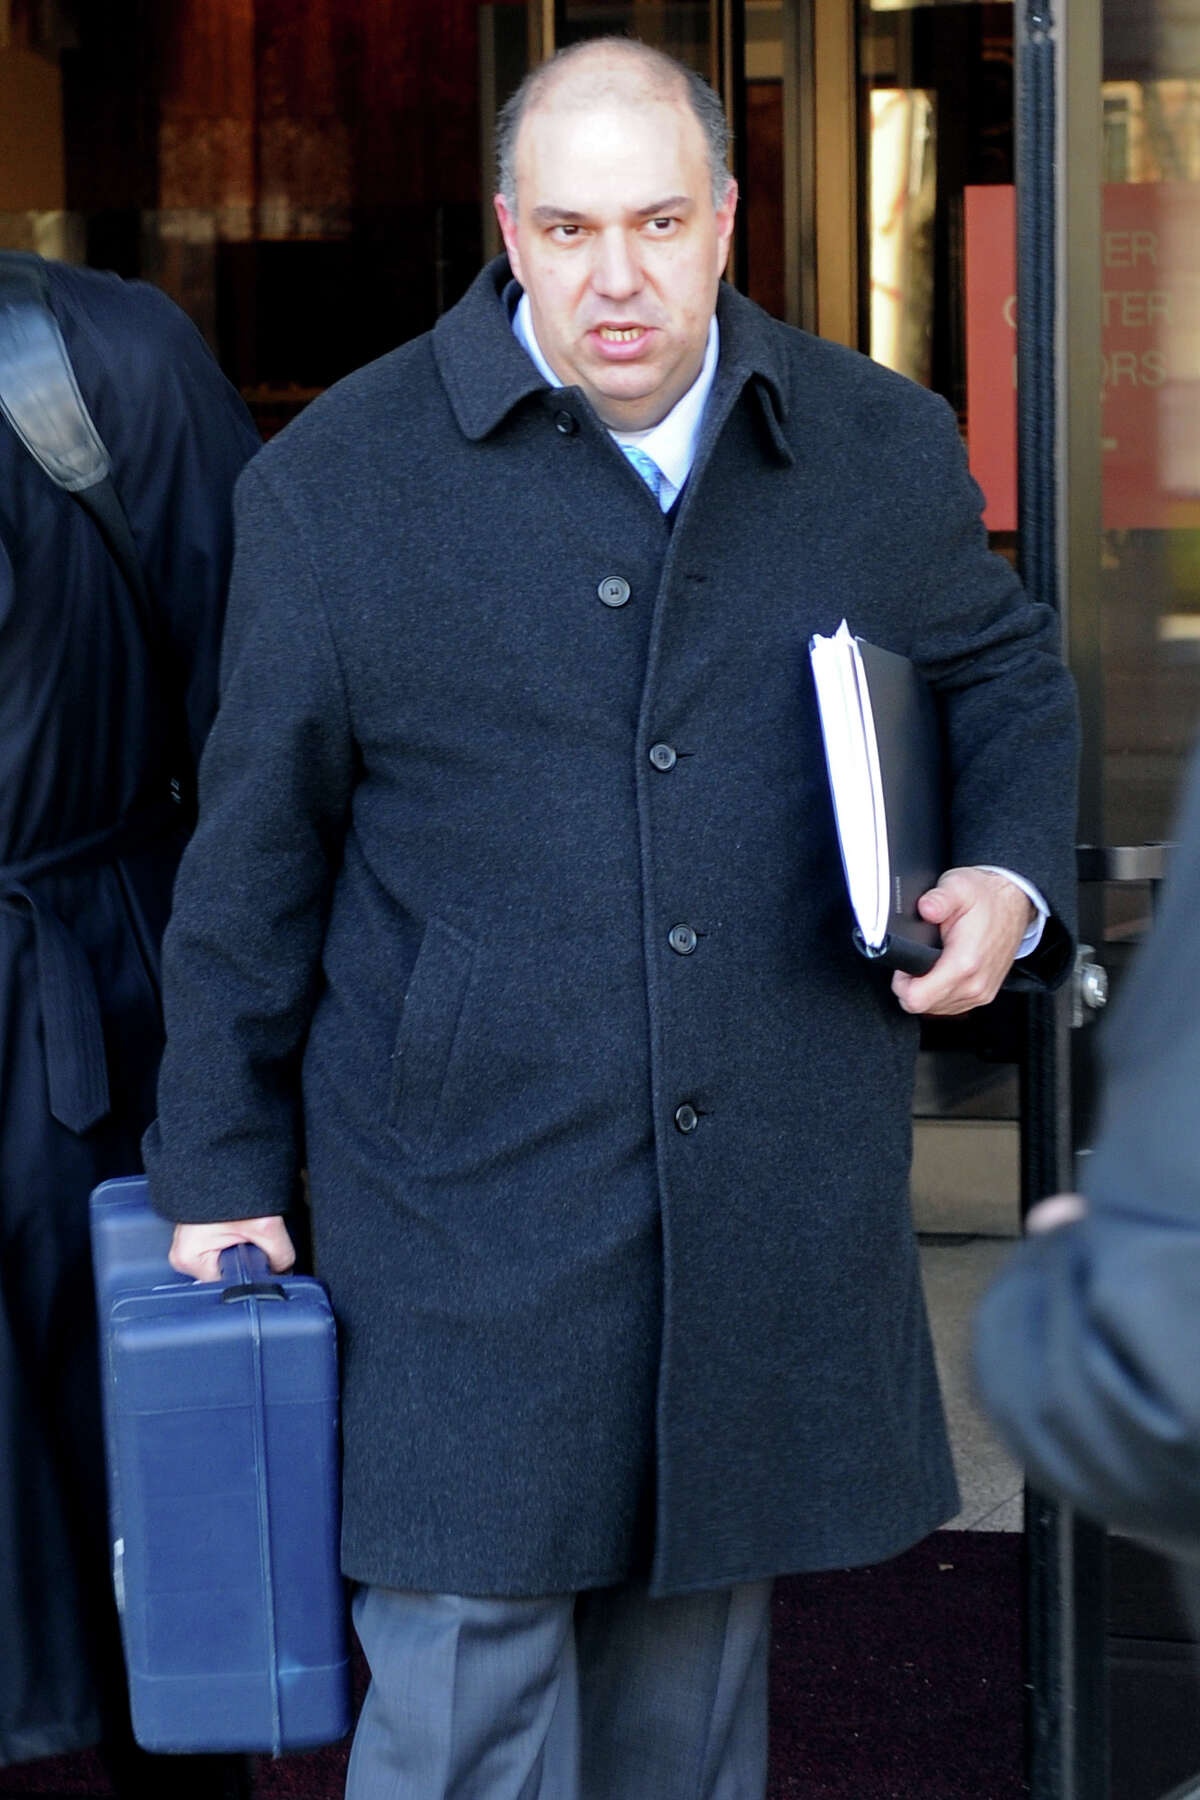 Francisco Illarramendi leaves Federal Court in Bridgeport, Conn. Monday, March, 7th, 2011, where he plead guilty to five counts involving investment advising and securities fraud. A prosecutor has asked a federal judge to hold the convicted hedge fund manager’s $2 million tax refund in escrow pending his September sentencing for operating the largest Ponzi scheme ever investigated in Connecticut.